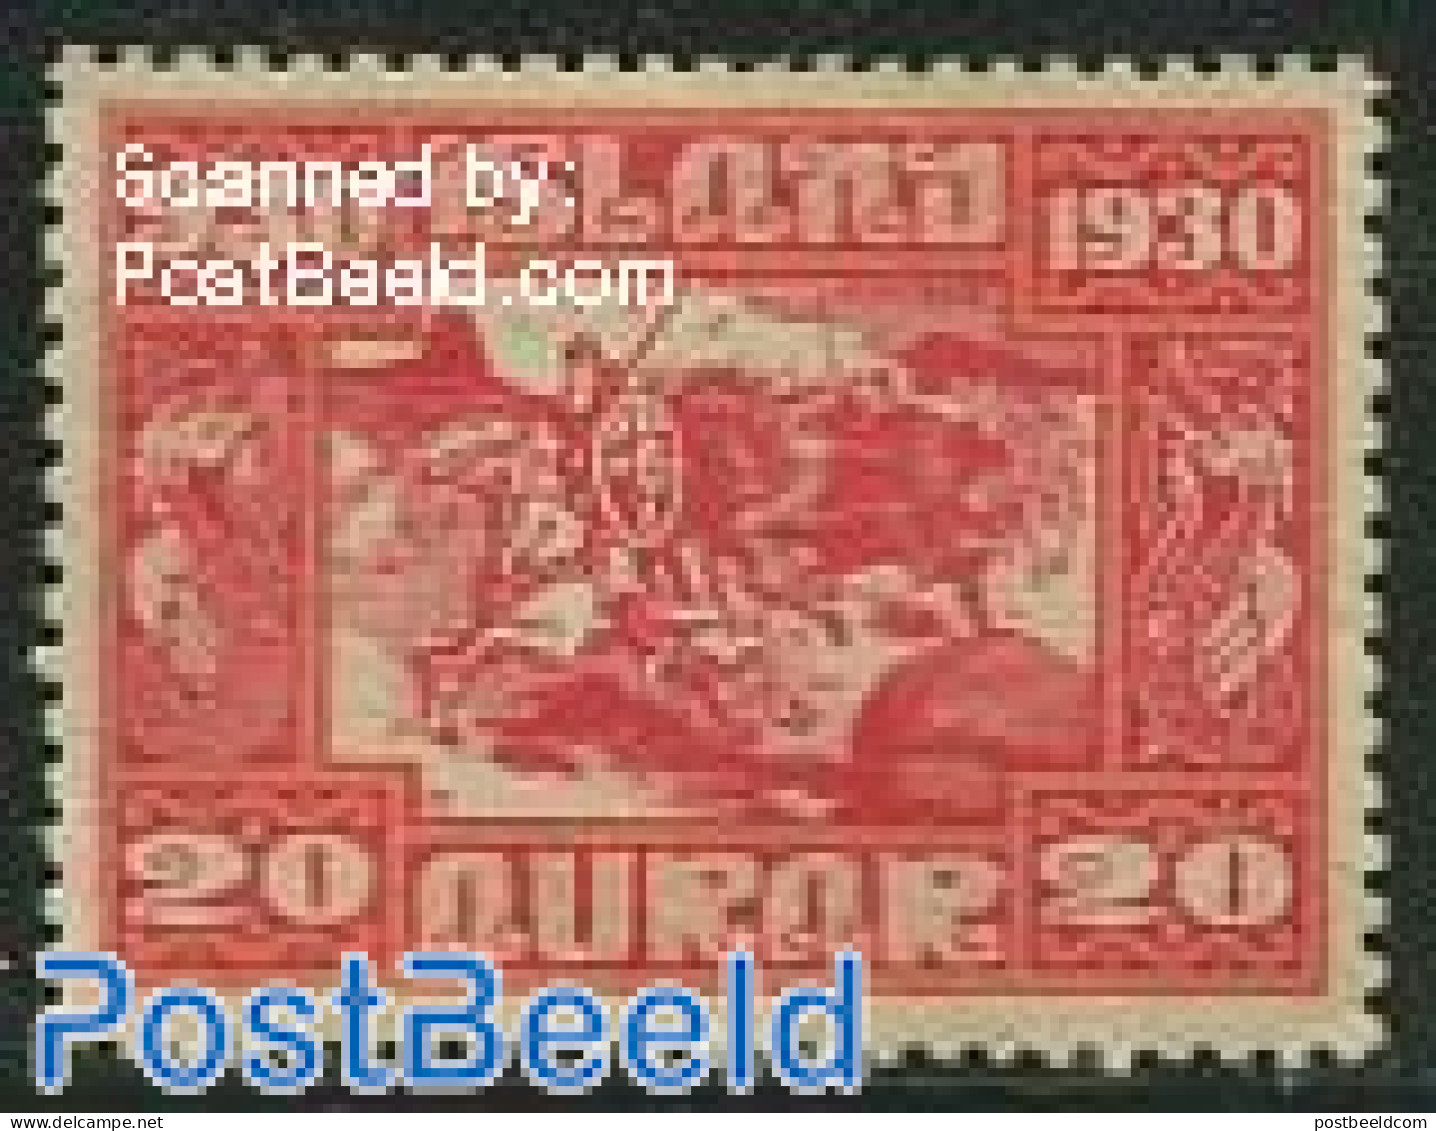 Iceland 1930 20A, Stamp Out Of Set, Mint NH, Nature - Horses - Nuevos